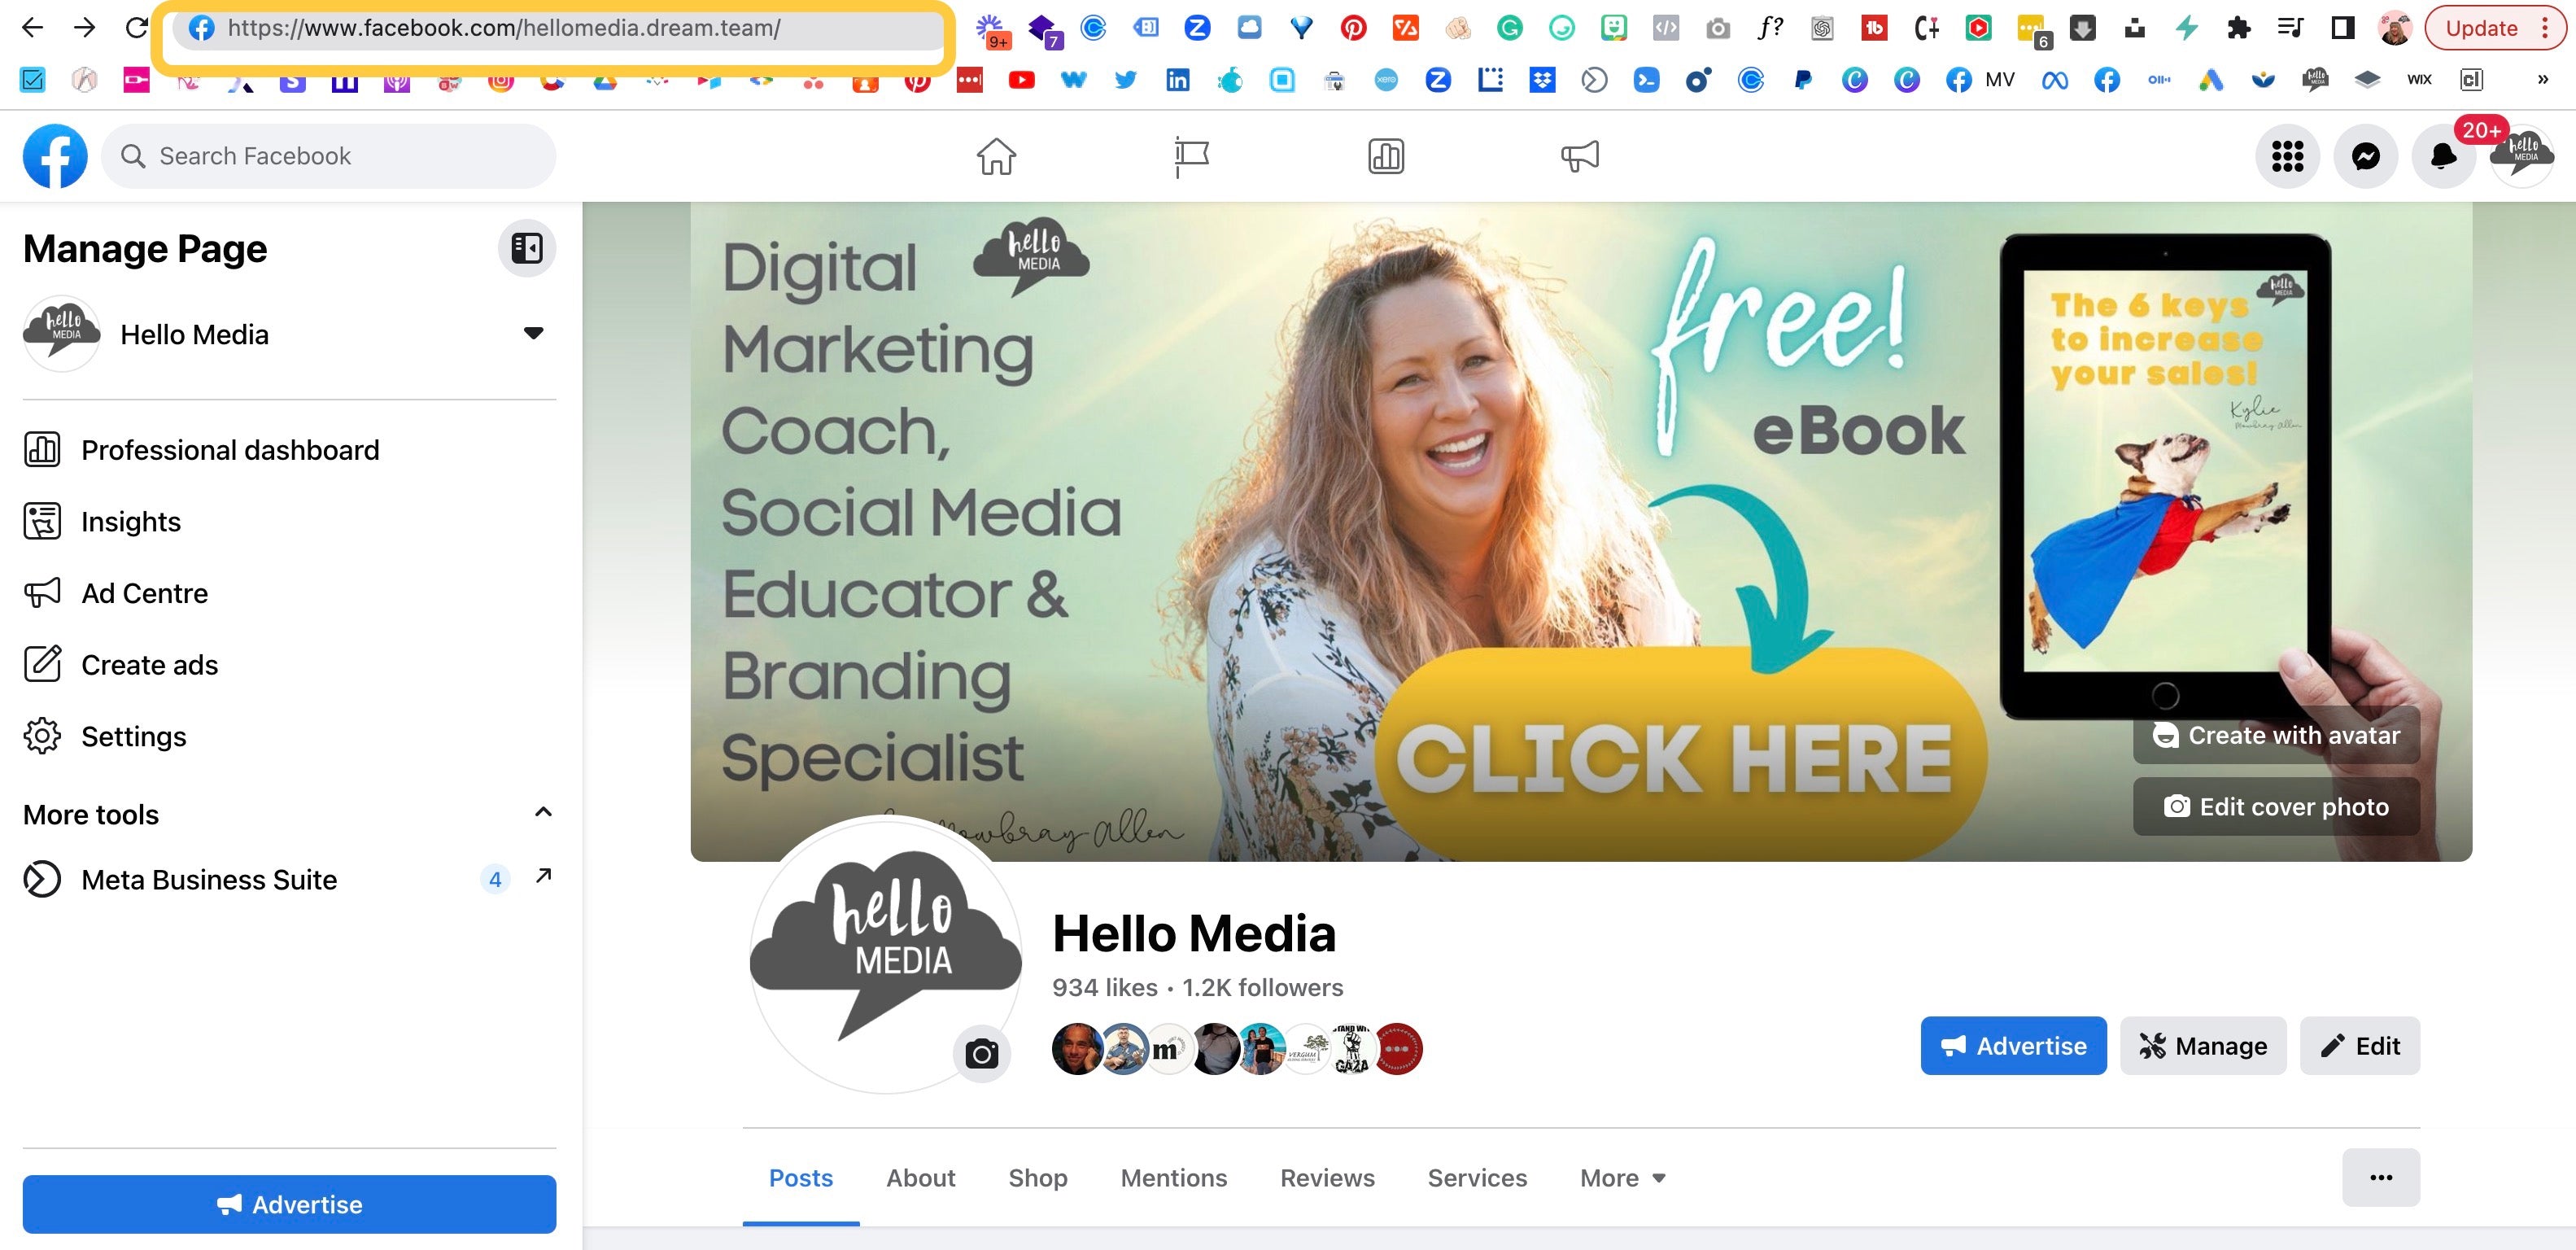 Facebook Business Page Tutorial (Updated for 2023 Changes!) 